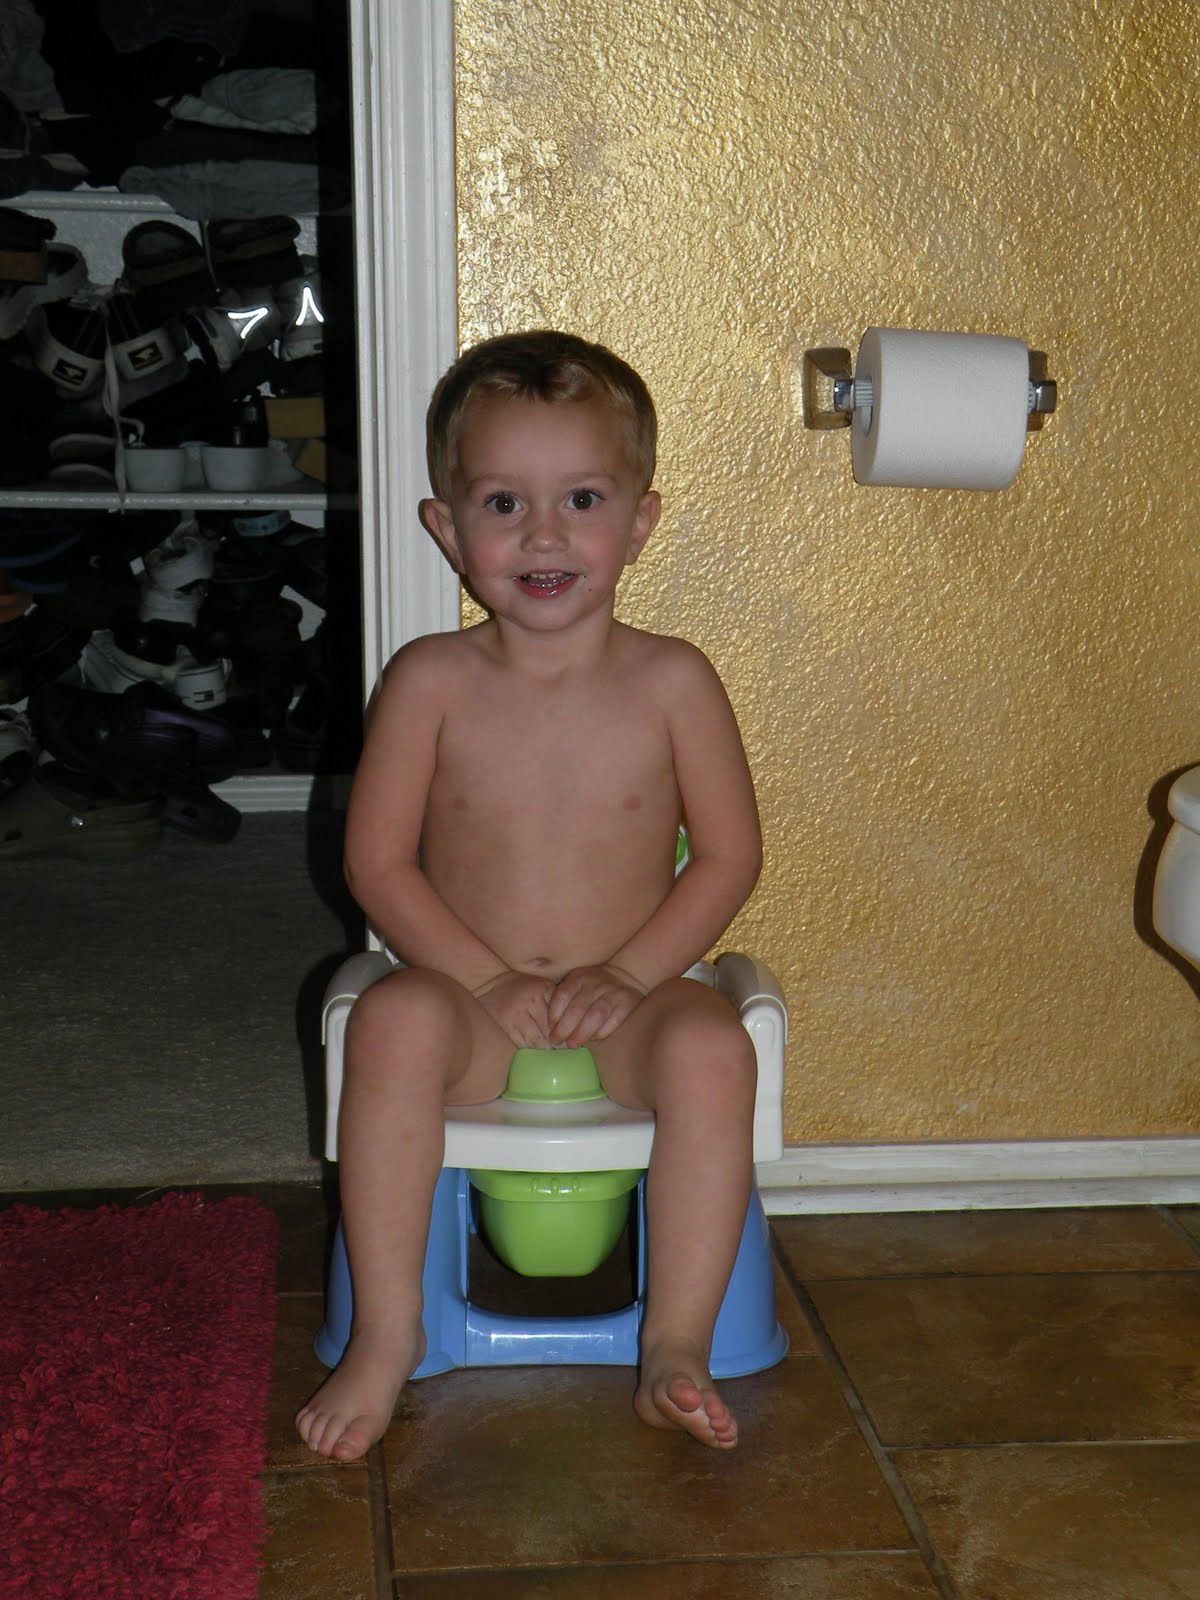 Tips for potty training boys to poop, baby peeing on potty